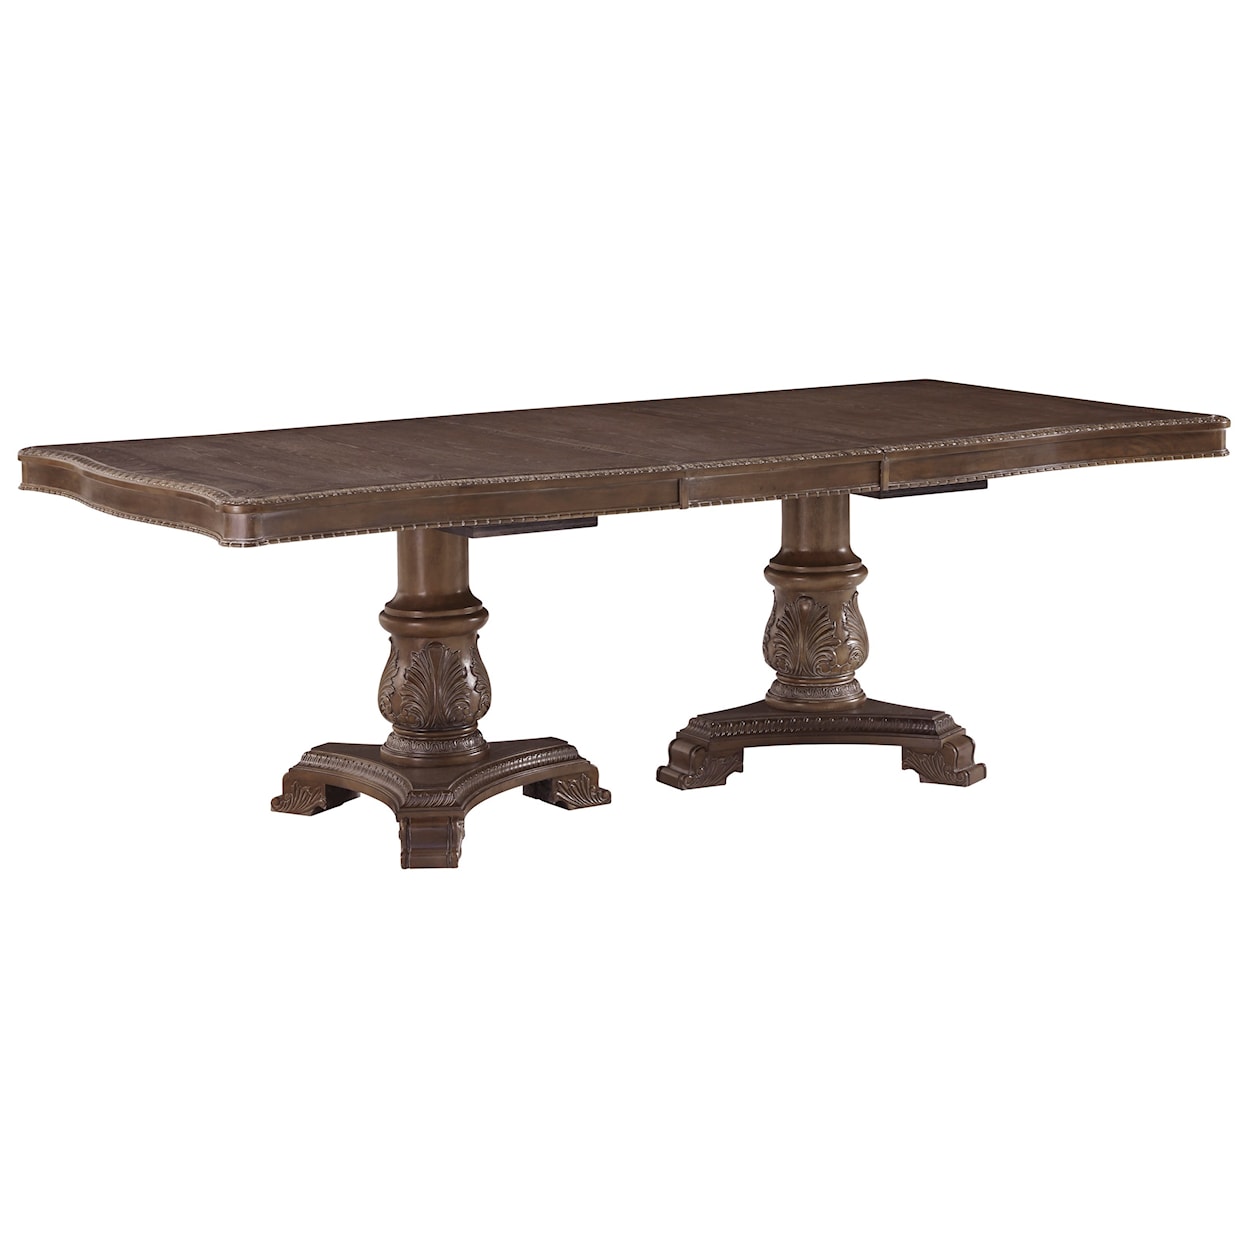 Signature Design by Ashley Furniture Charmond Rectangular Dining Room Extension Table